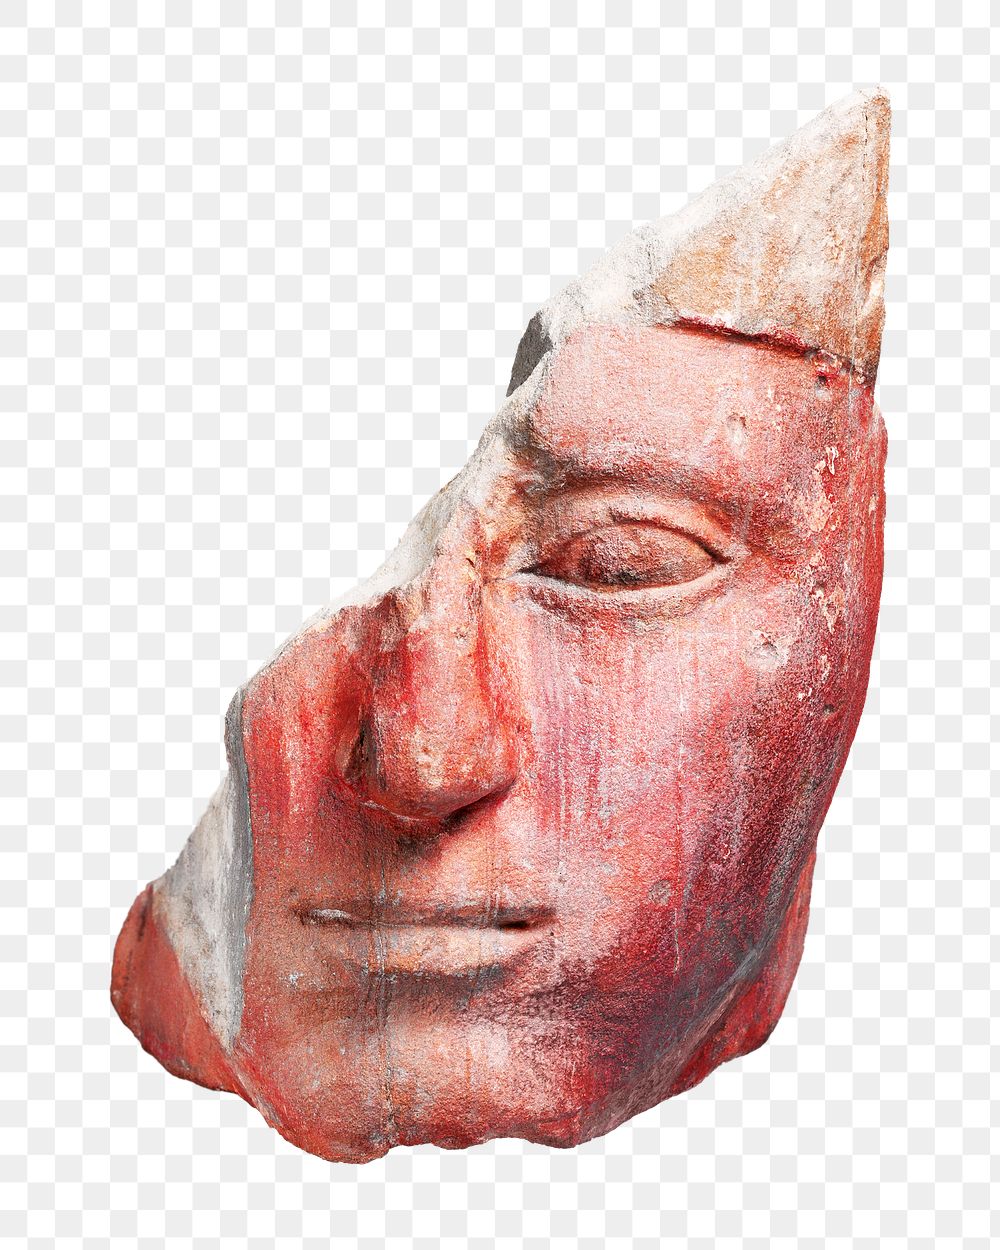 Sculpture png king Amenhotep I statue sticker, transparent background.    Remastered by rawpixel